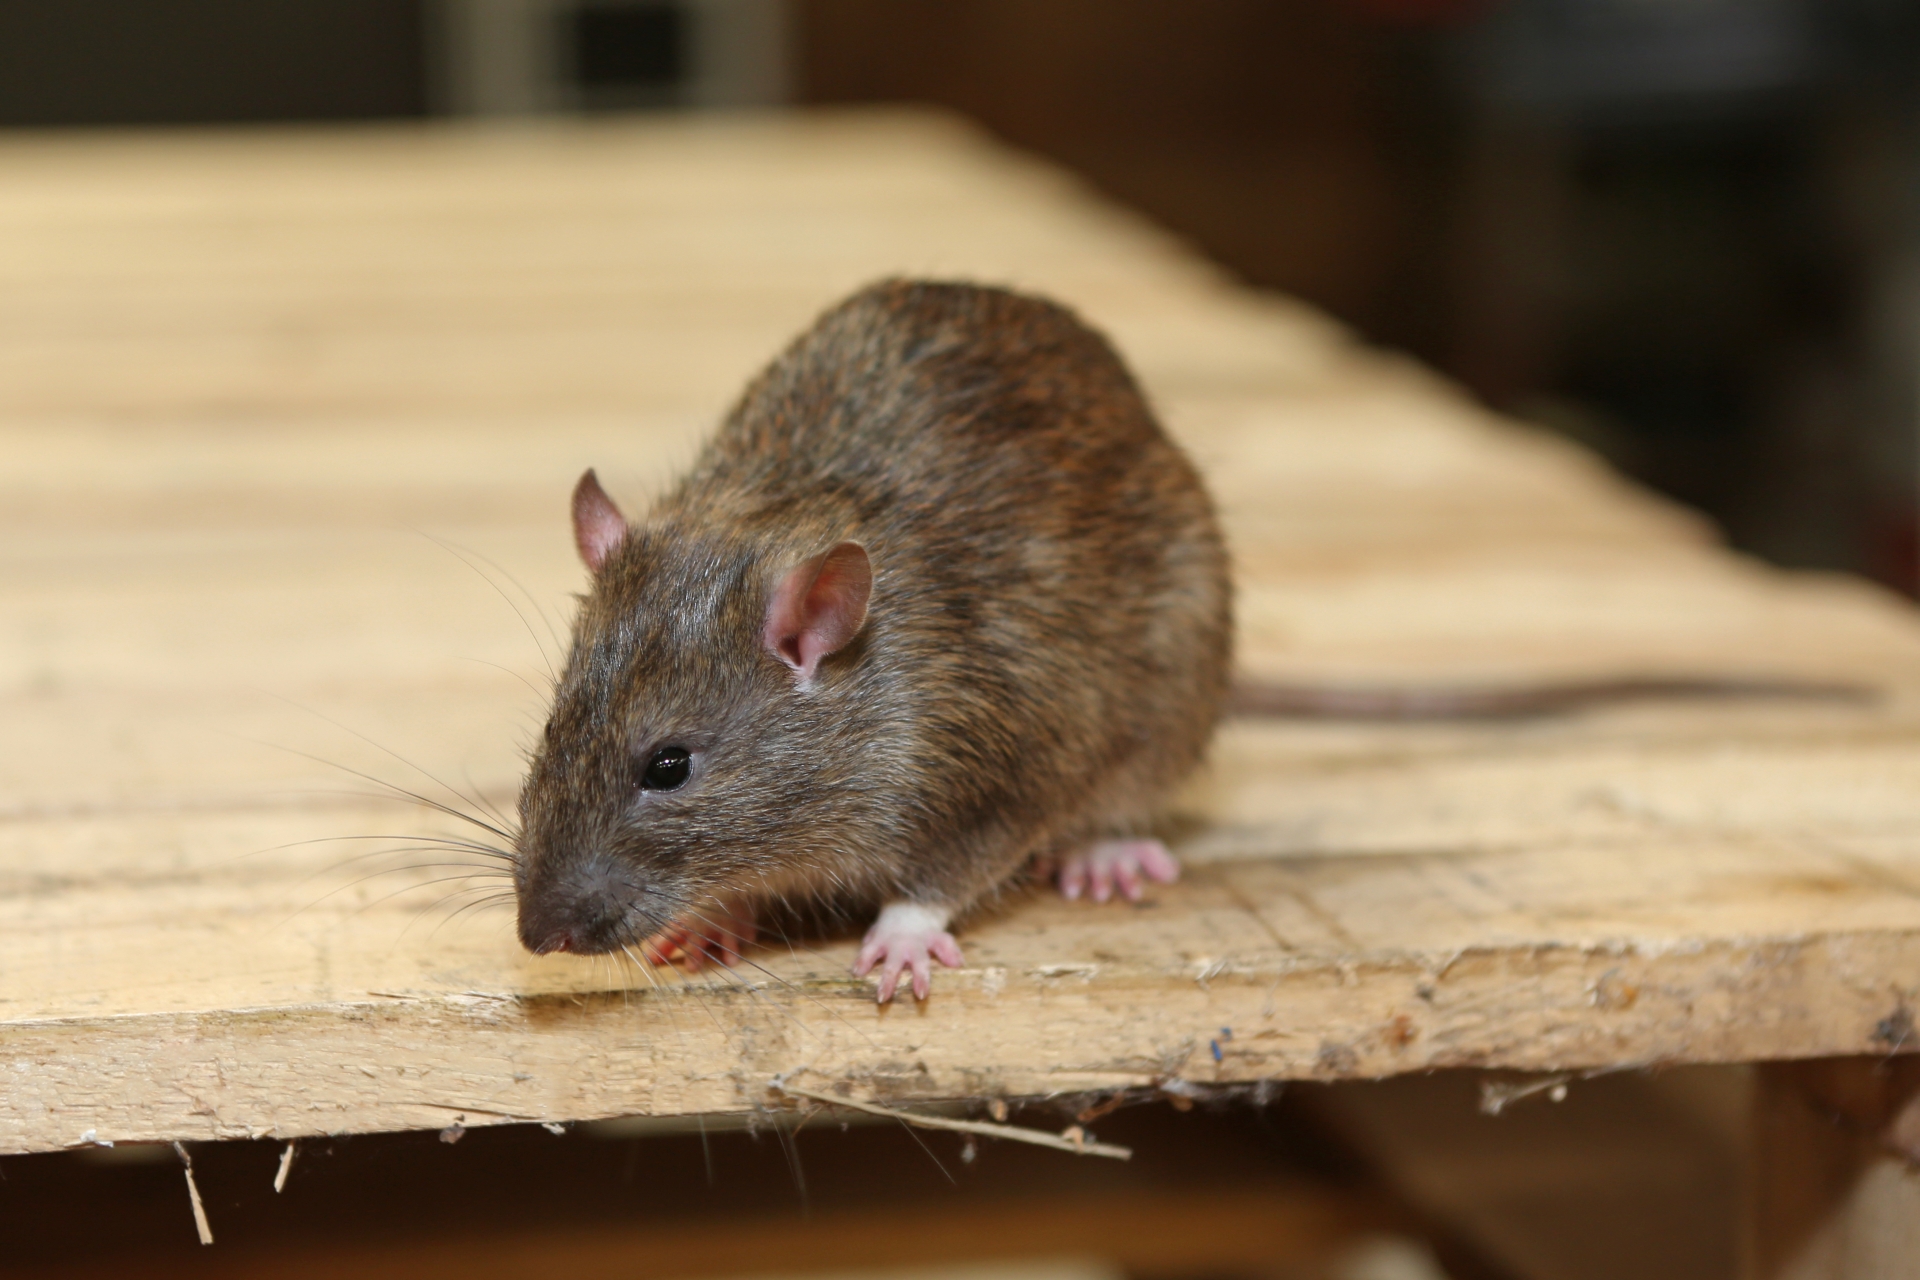 Rat extermination, Pest Control in Great Bookham, Little Bookham, KT23. Call Now 020 8166 9746